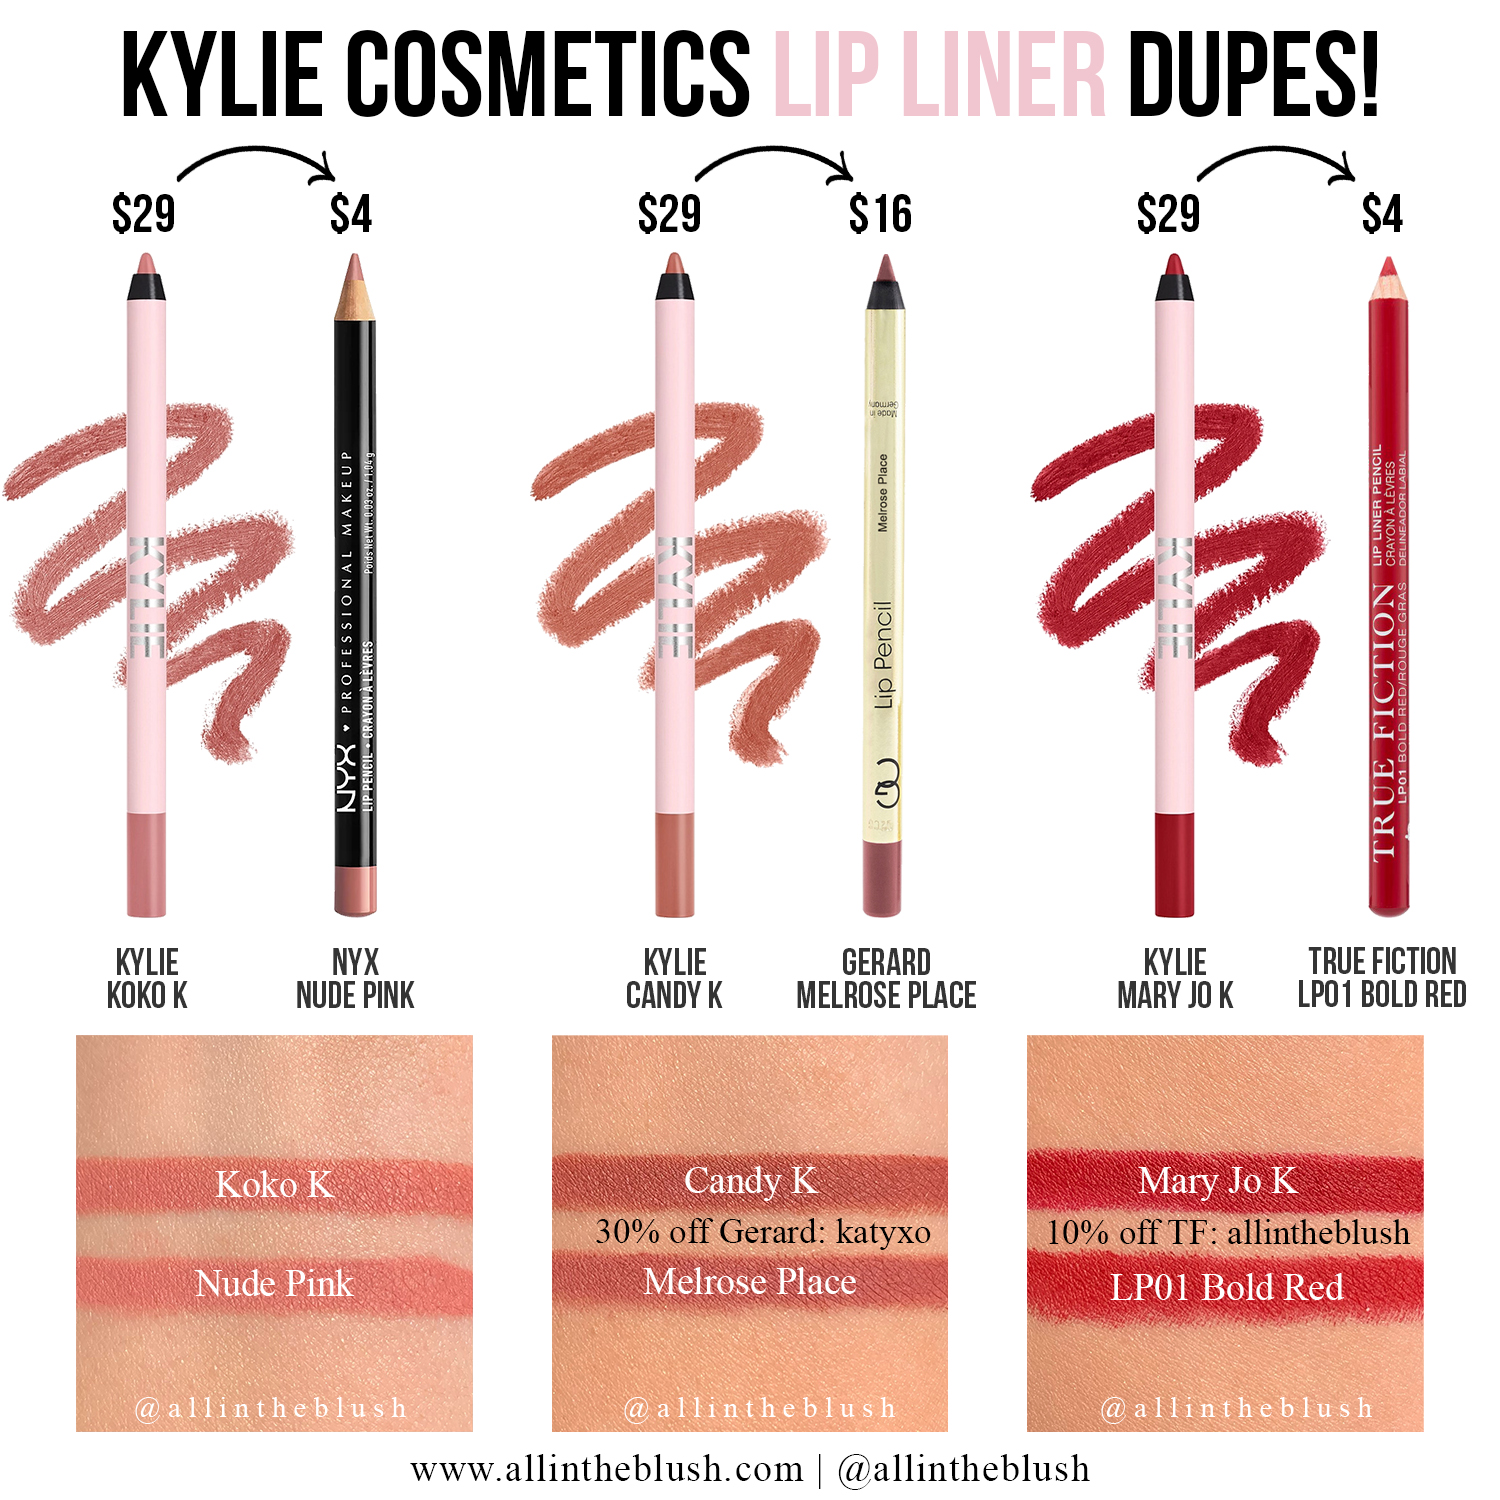 Kylie Cosmetics Reformulated Lip Liner Dupes